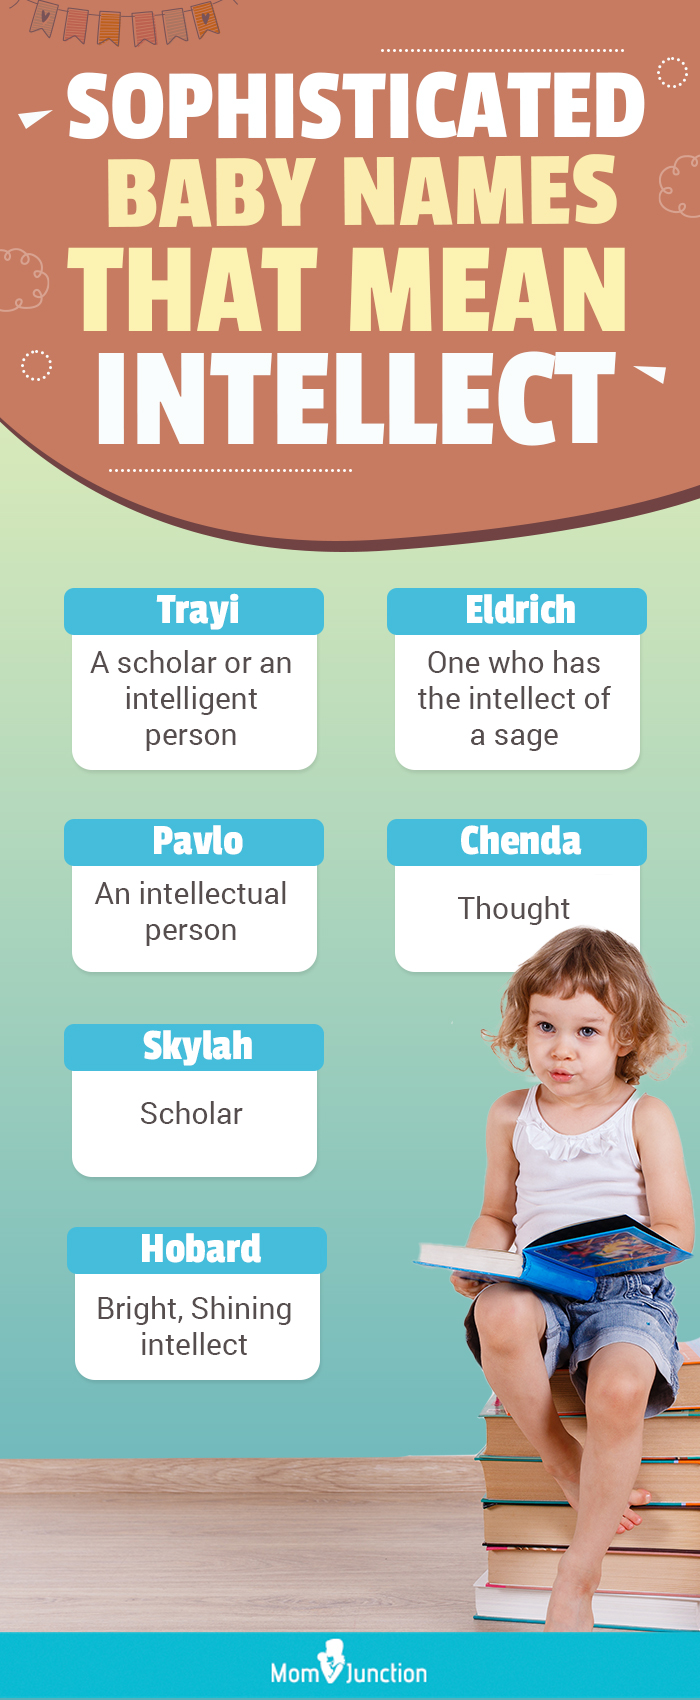 Sophisticated Baby Names That Mean Intellect (infographic)